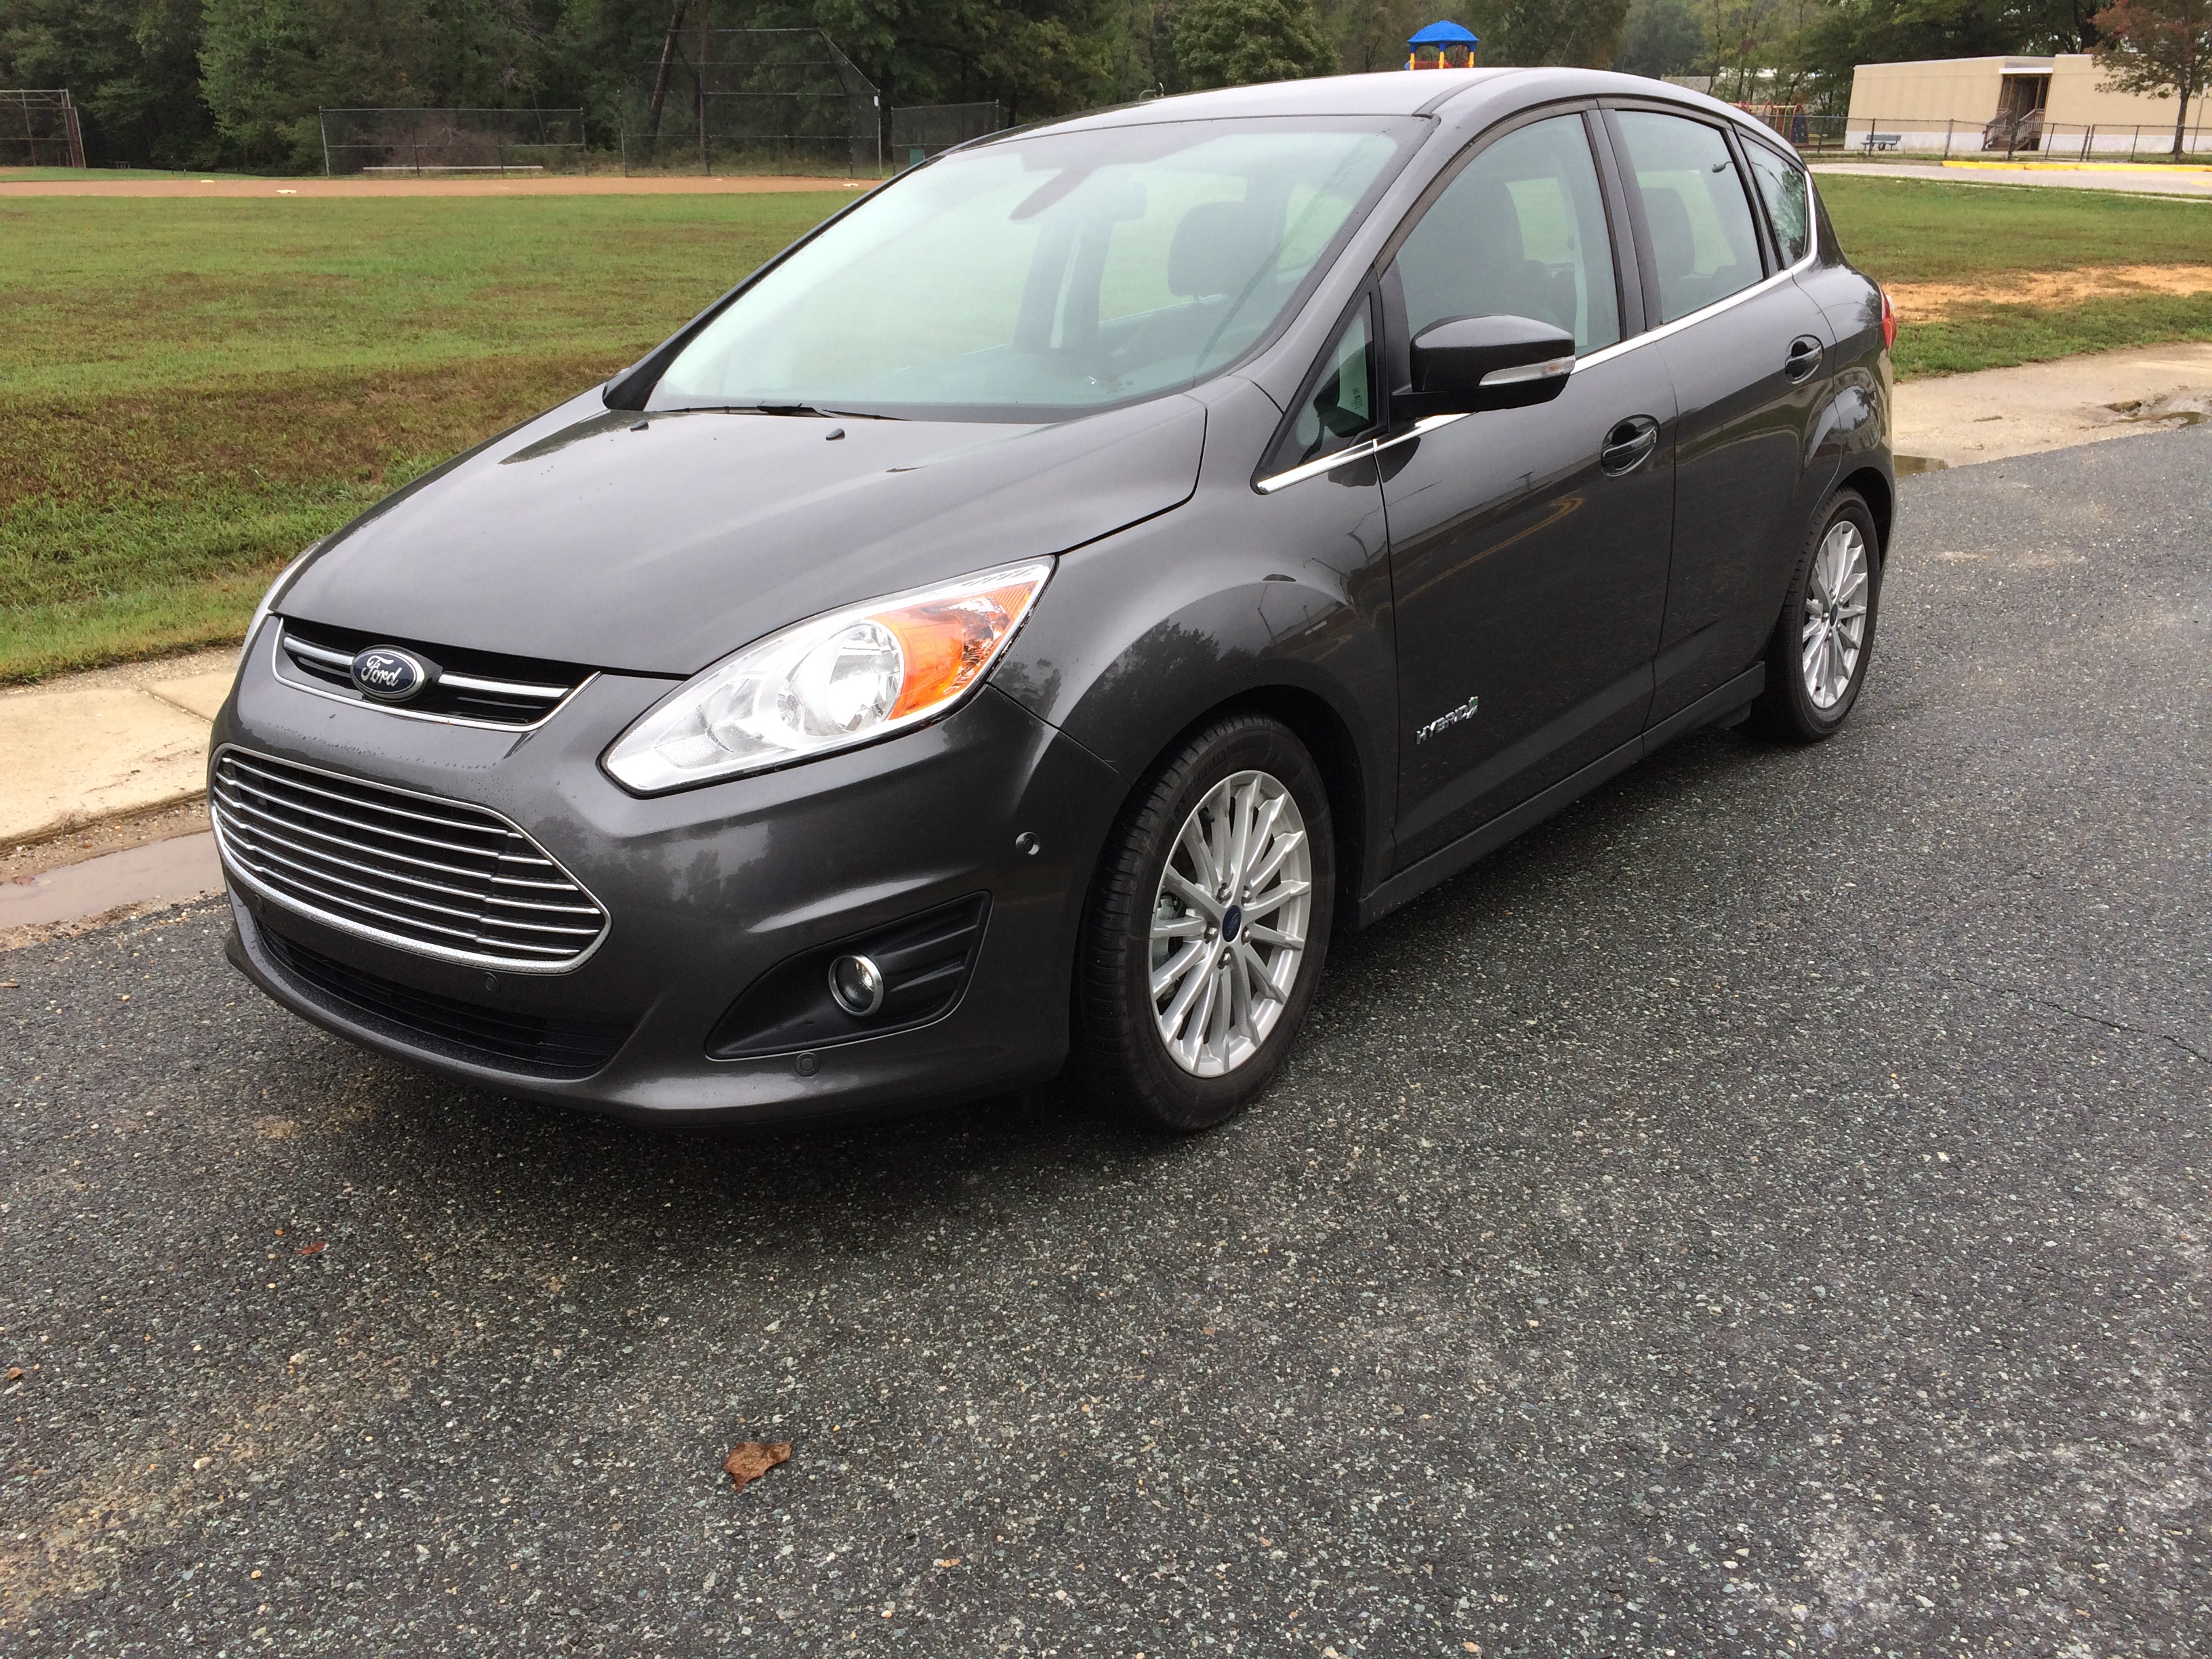 Ford C-Max Hybrid: A gas thrifty alternative to normal wagons